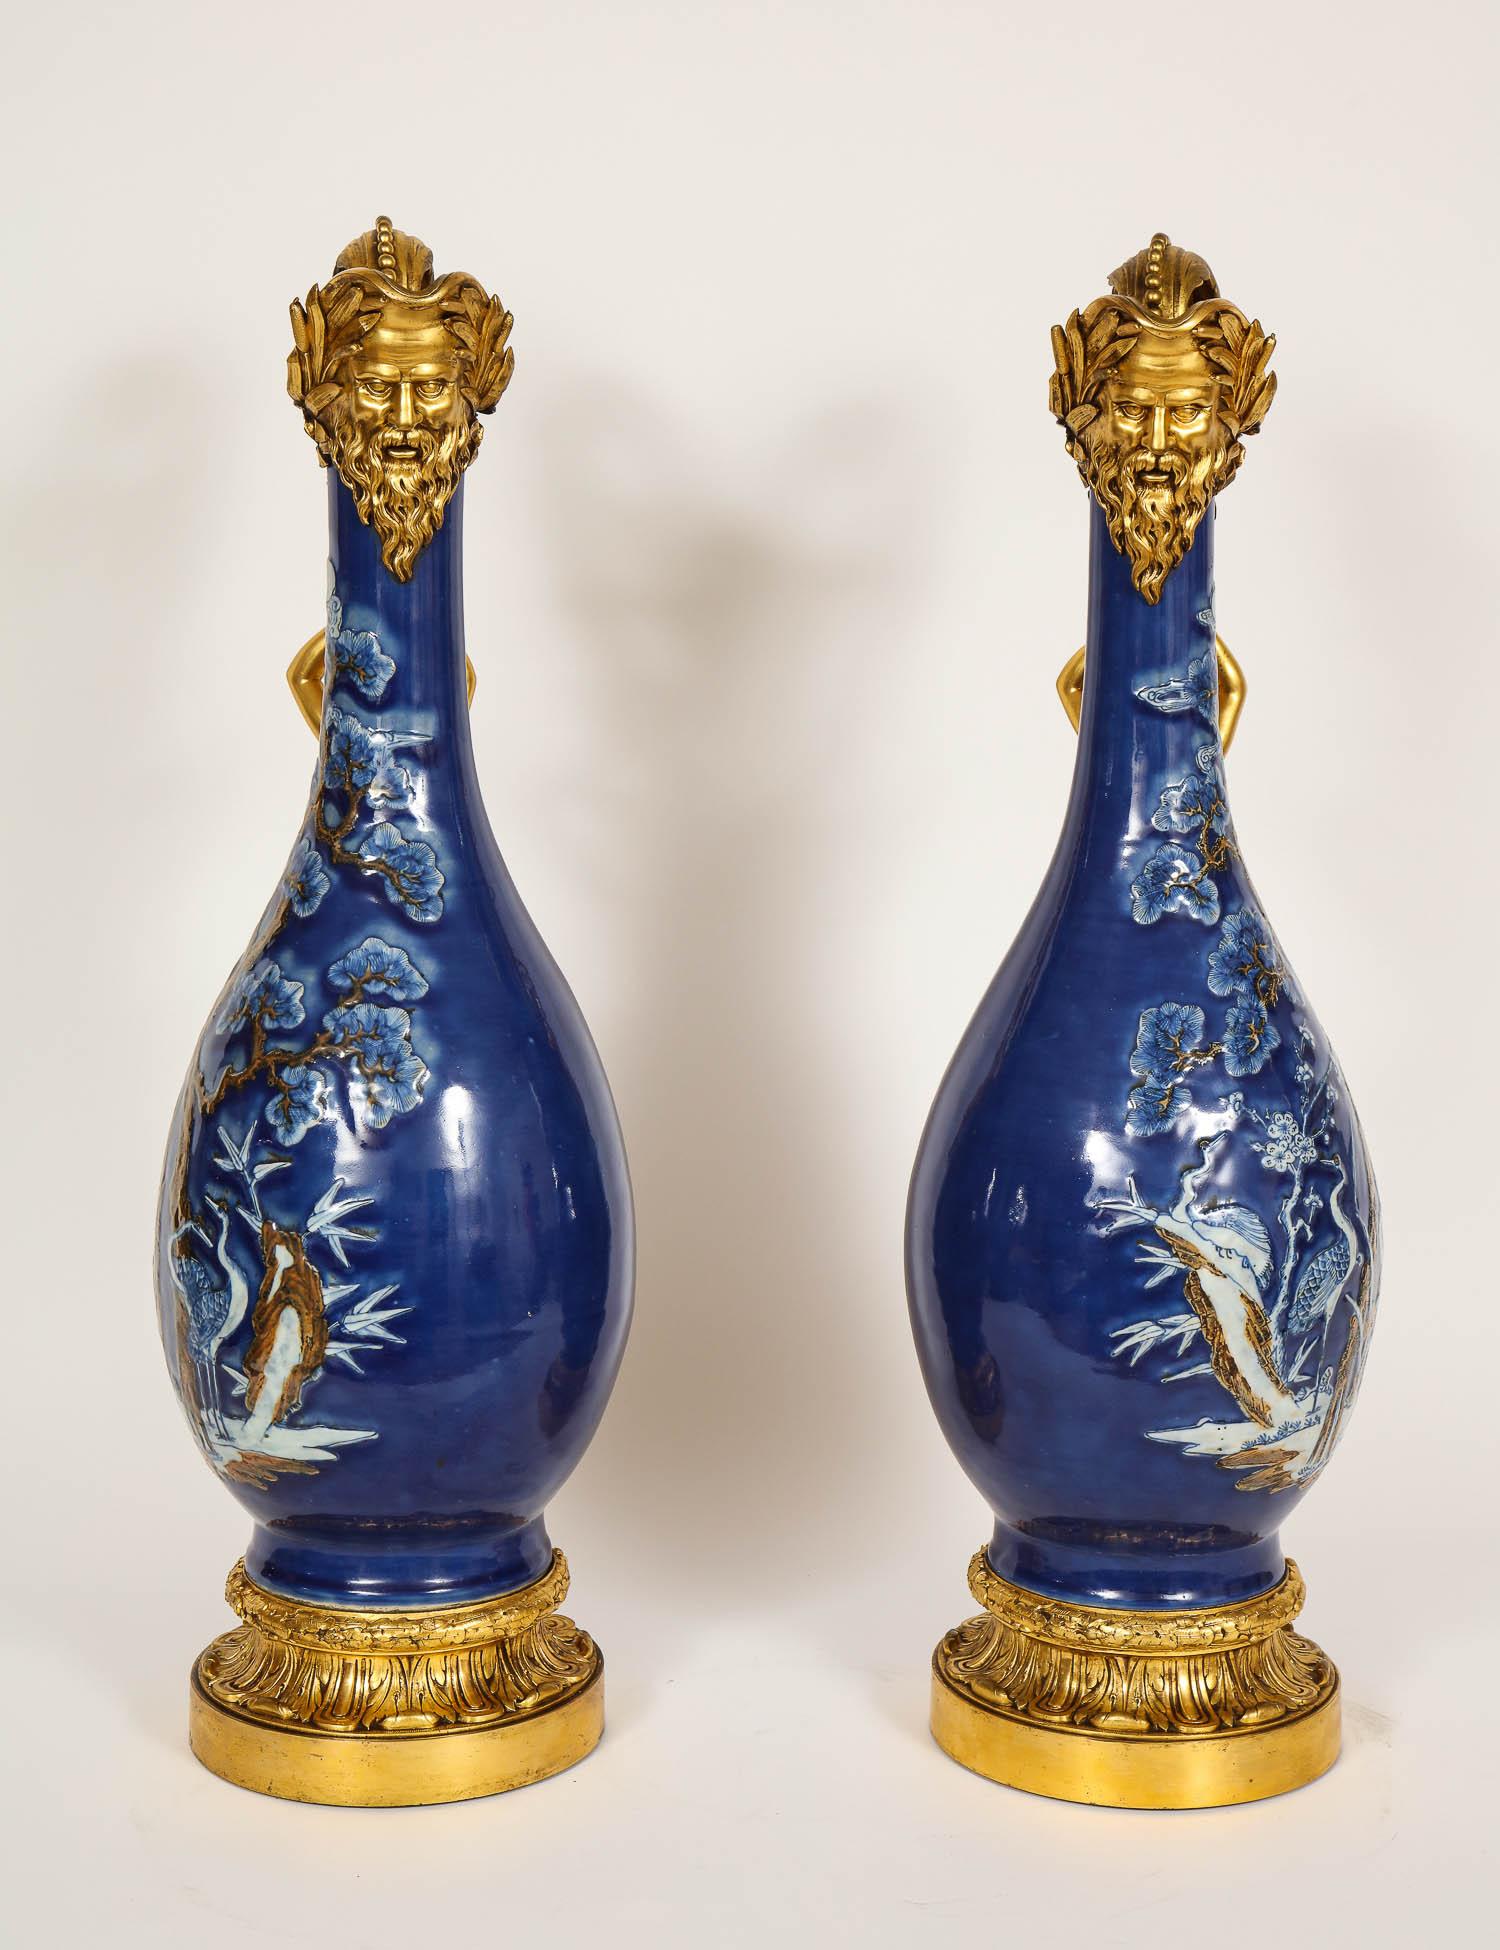 Pair of French Louis XVI Style Ormolu Mounted Chinese Export Porcelain Vases For Sale 3